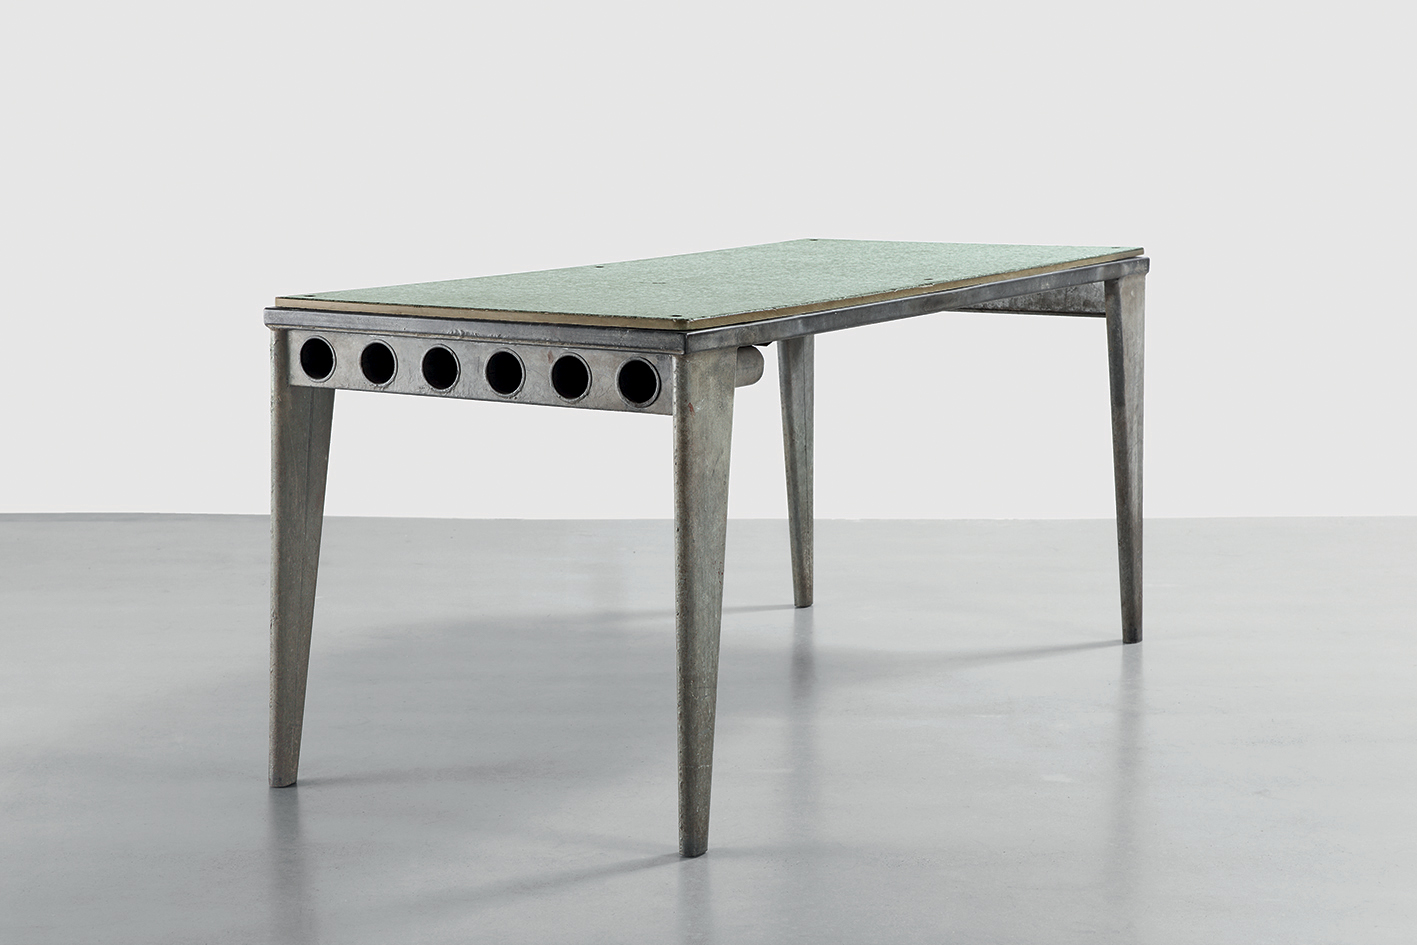 Refectory table with profiled legs, 1939. Galvanized steel sheet and Granipoli table top. Provenance: Colonie Sanitaire de Saint-Brévin l’Océan.